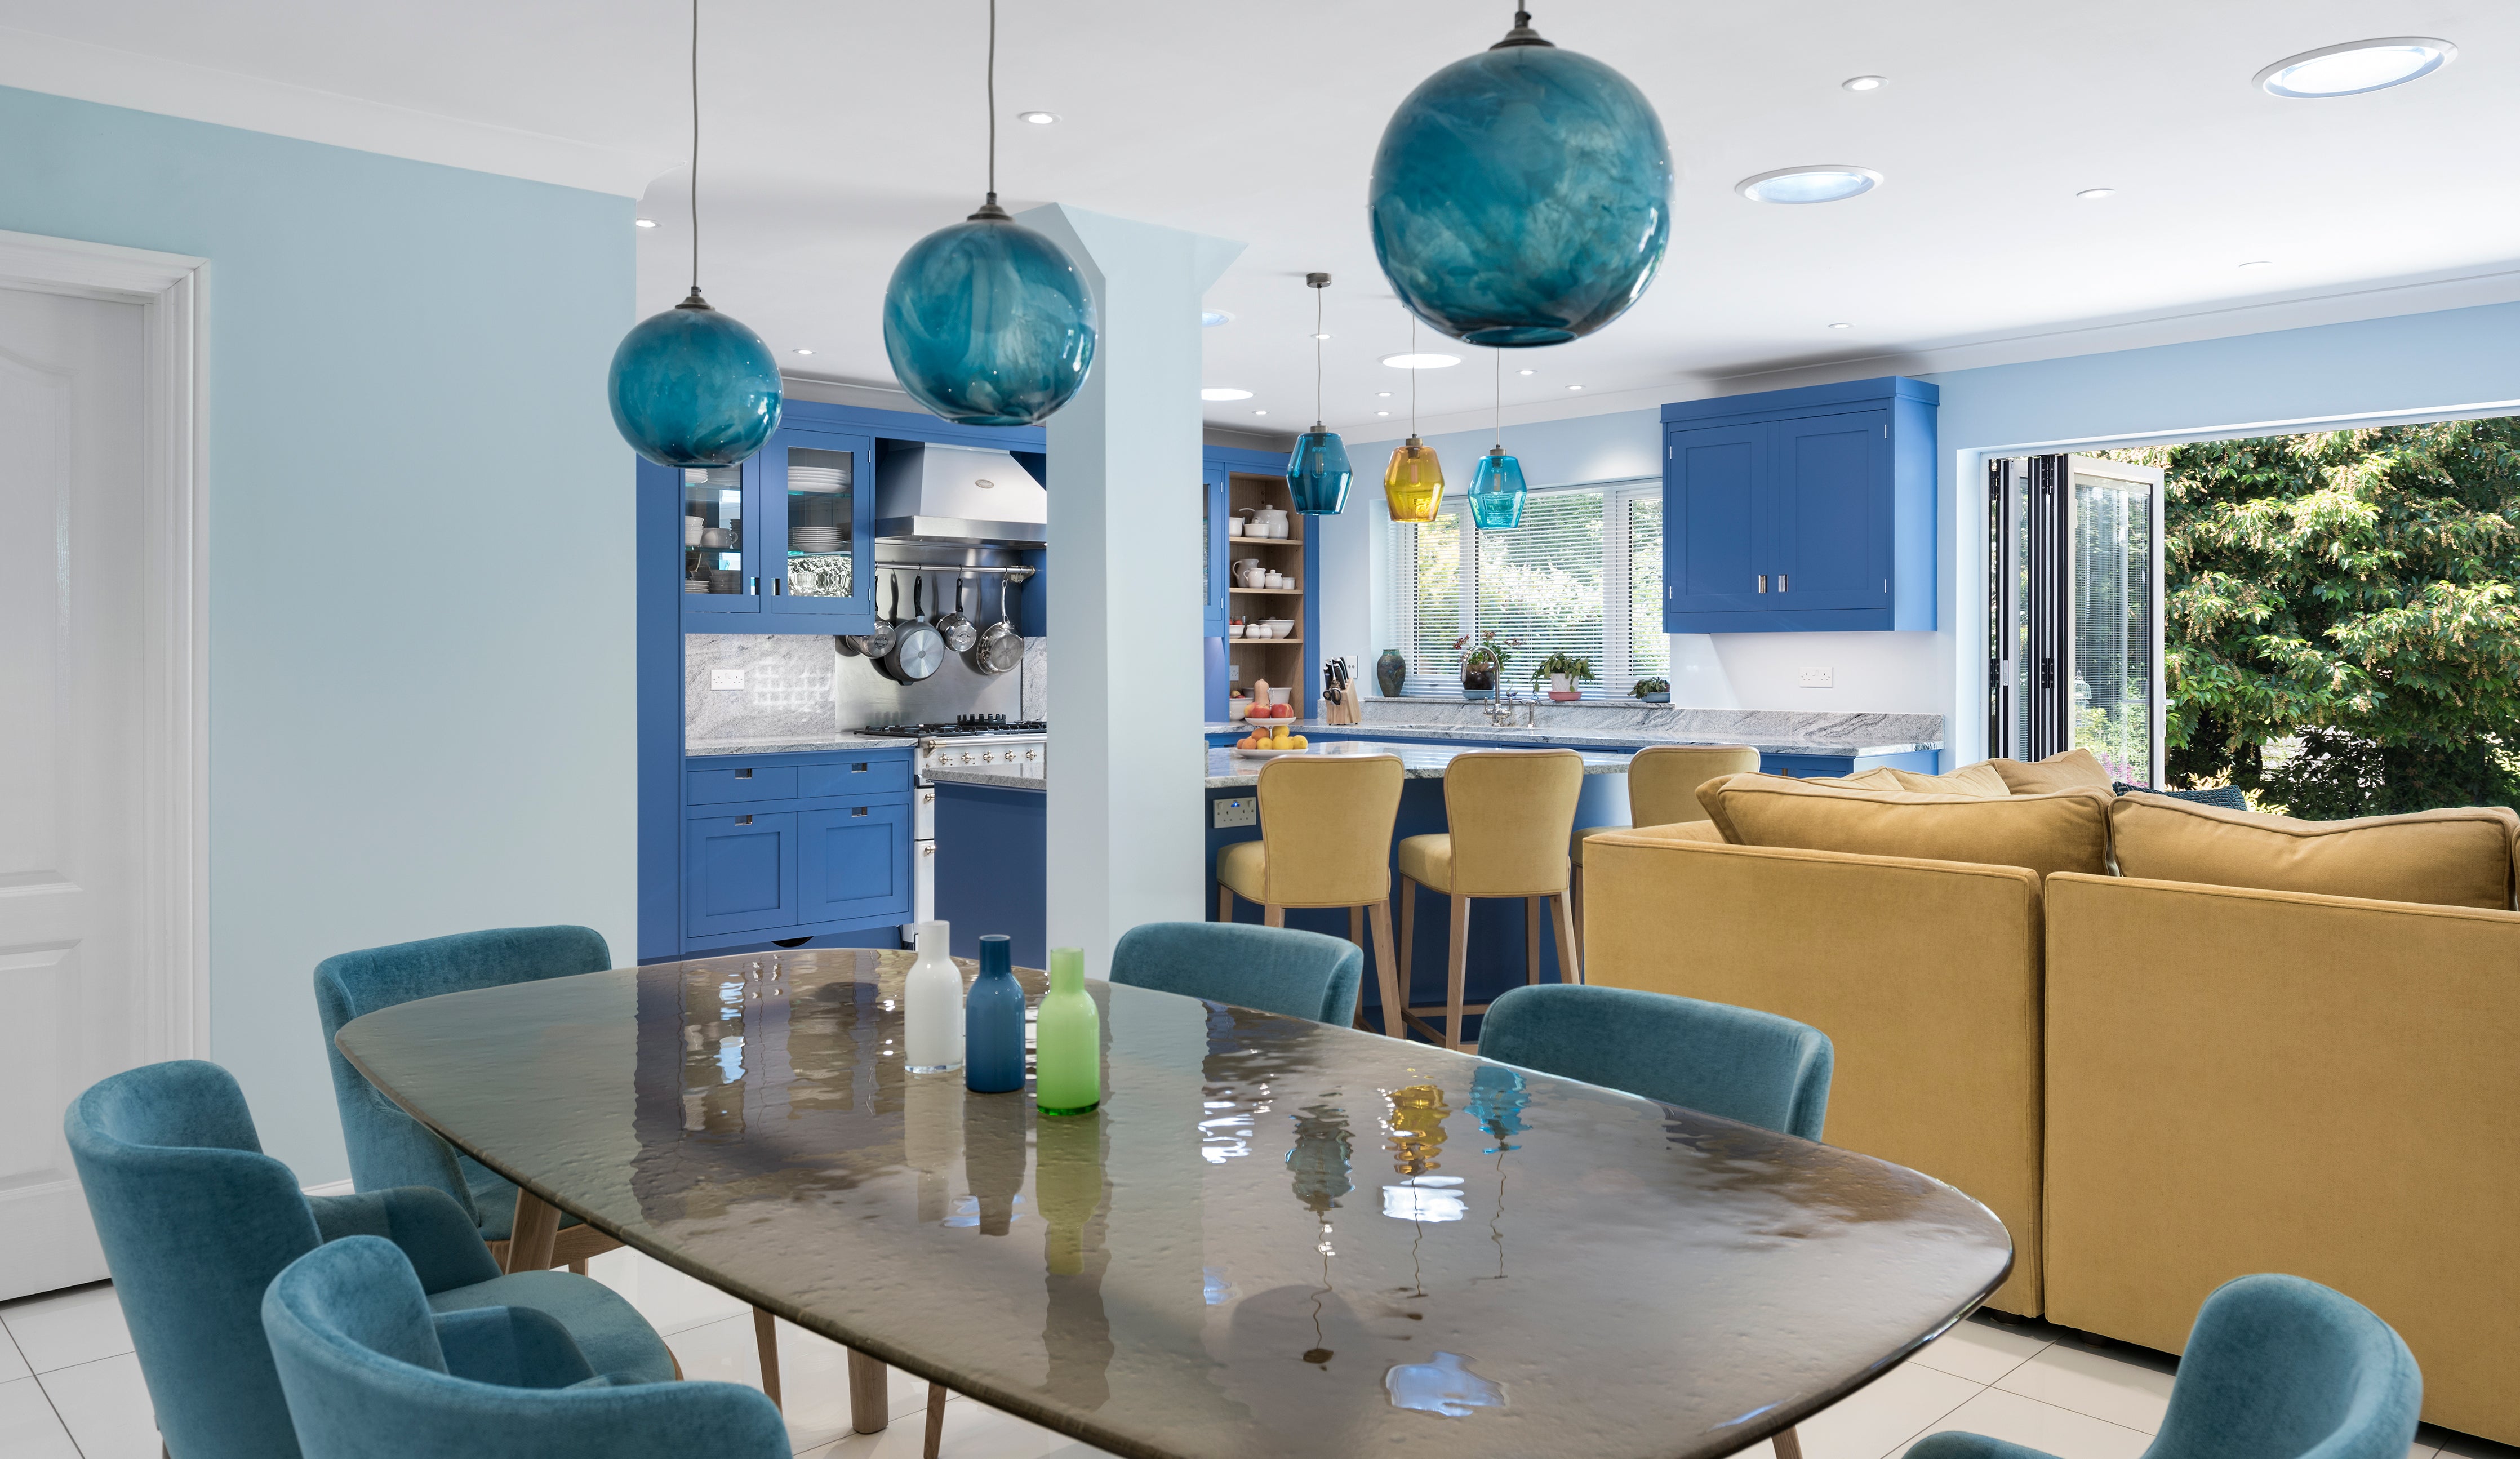 Mineral Pendant by Rothschild &amp; Bickers in Lazurite Aqua above kitchen table, Interior design by Deborah Law